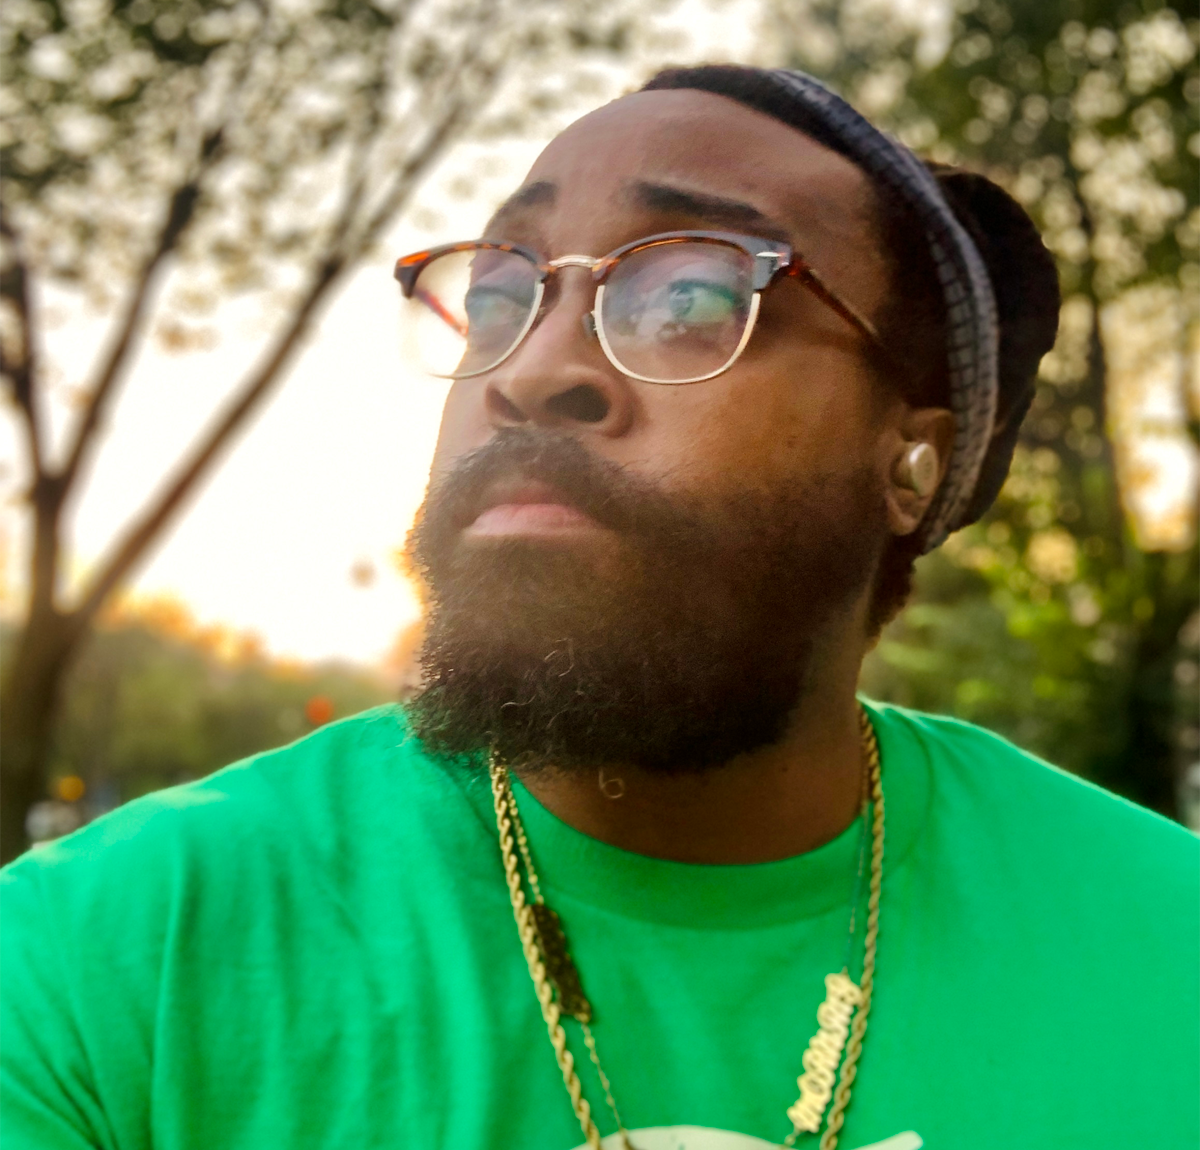 A person wearing a black and grey beanie and glasses with a gold necklace and green shirt.